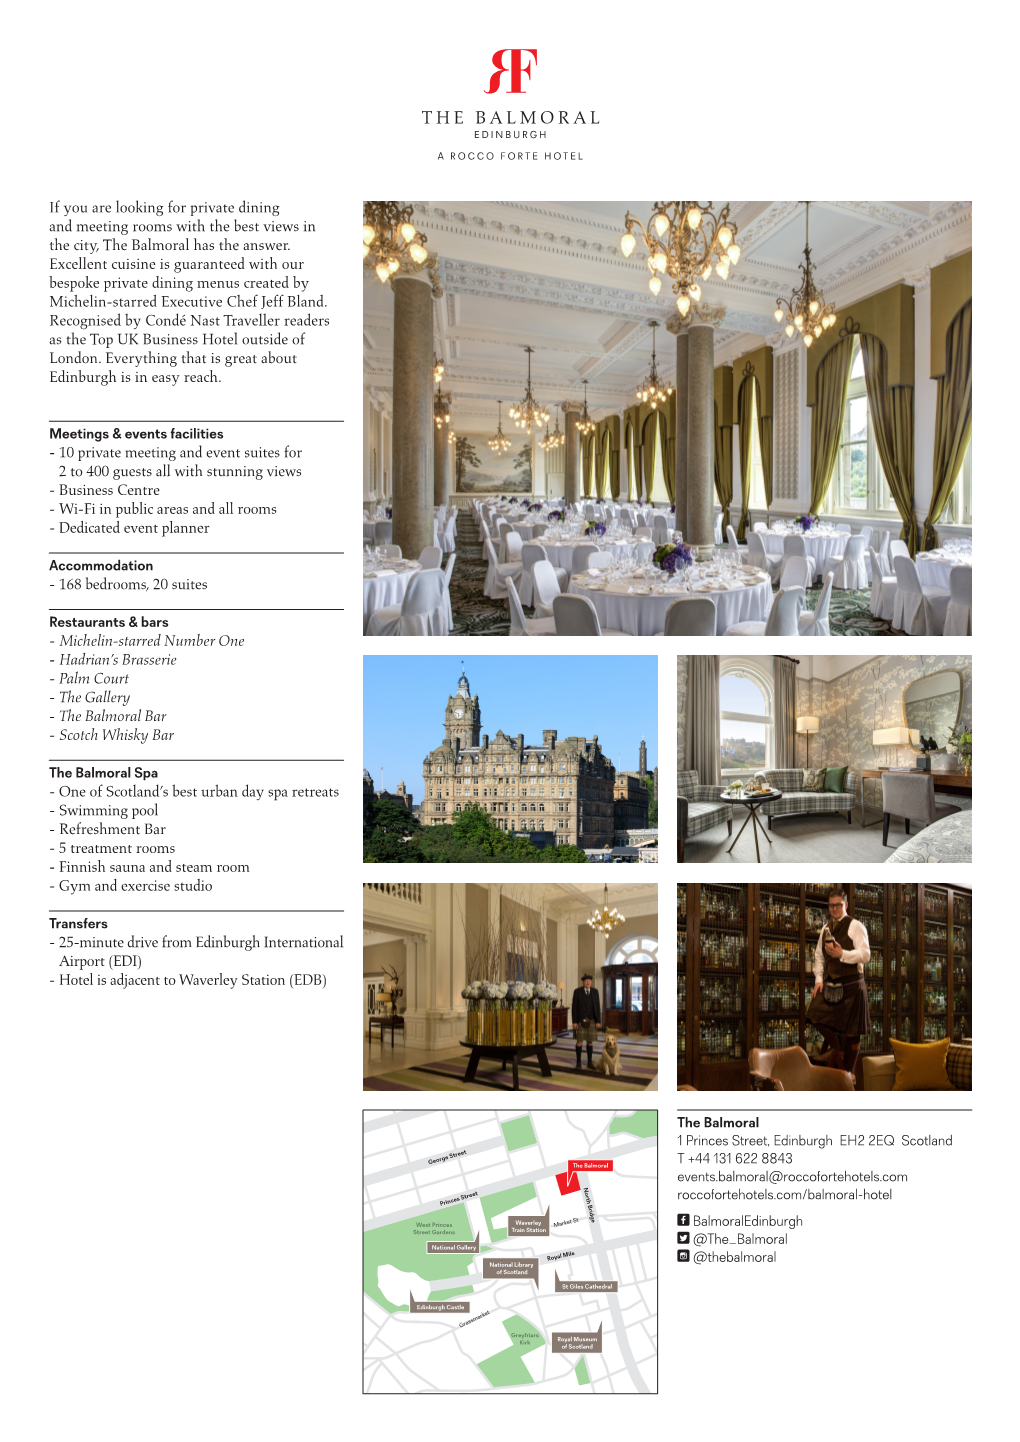 If You Are Looking for Private Dining and Meeting Rooms with the Best Views in the City, the Balmoral Has the Answer